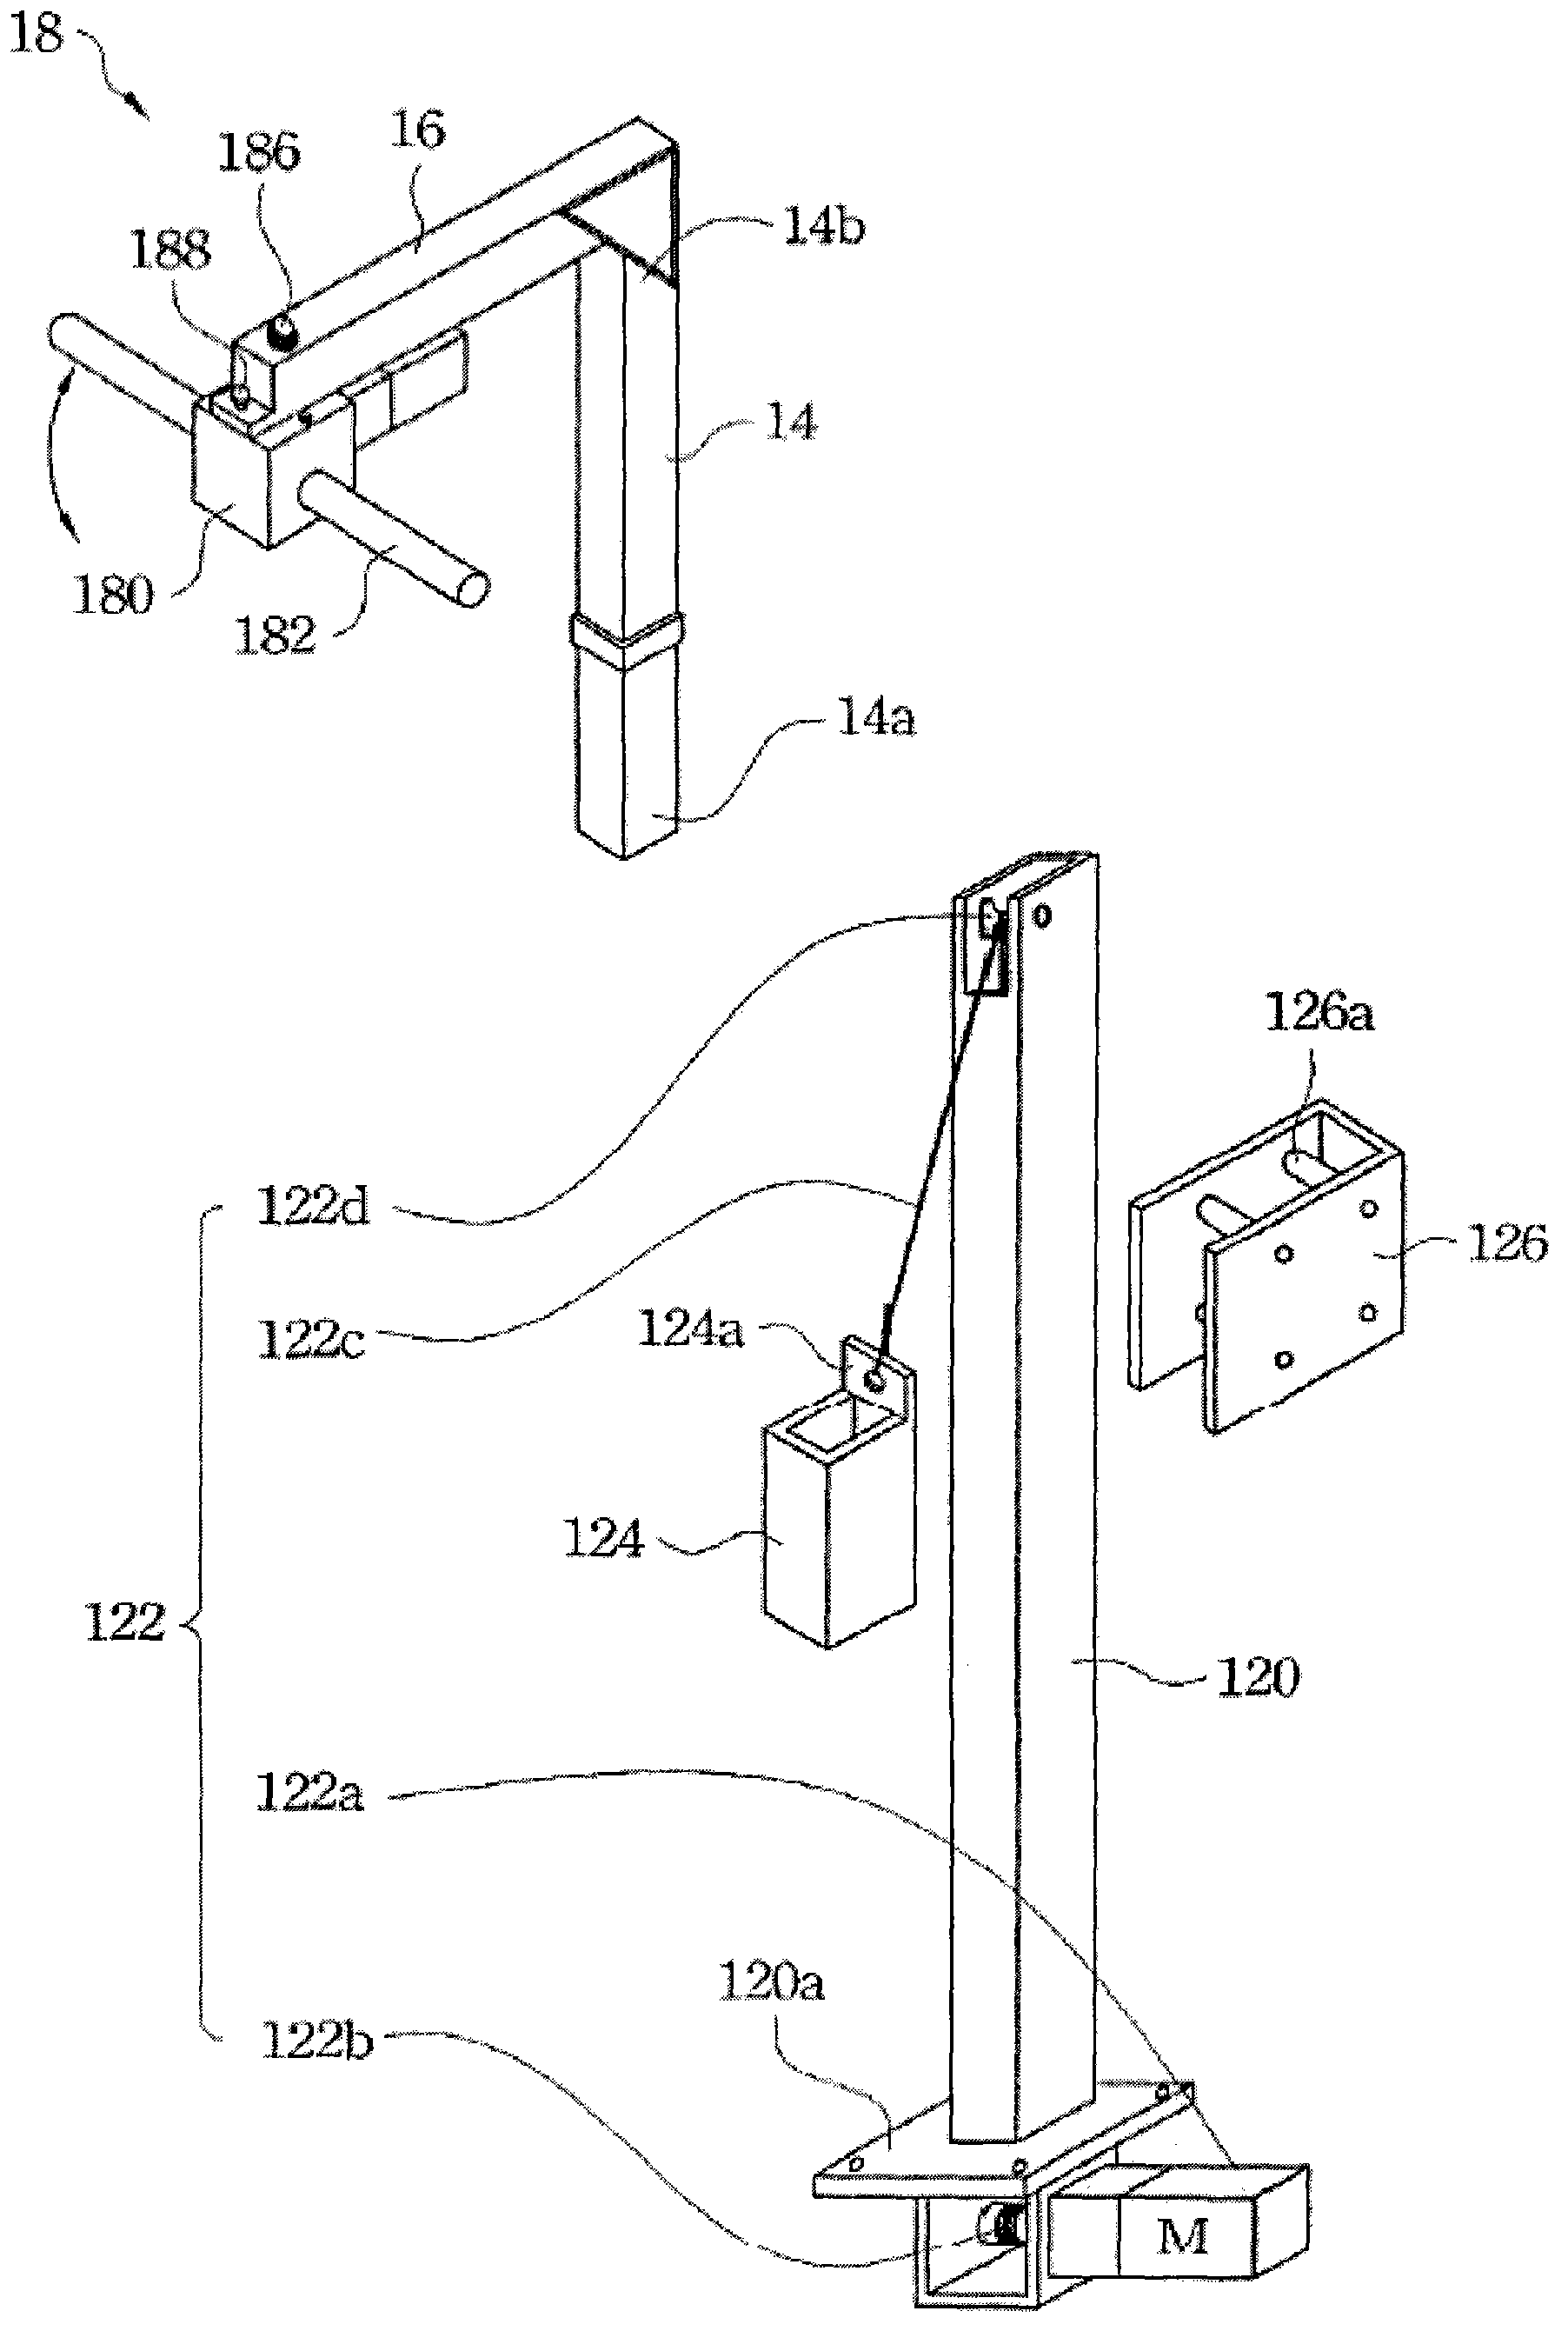 Device for turning over and transferring the patient